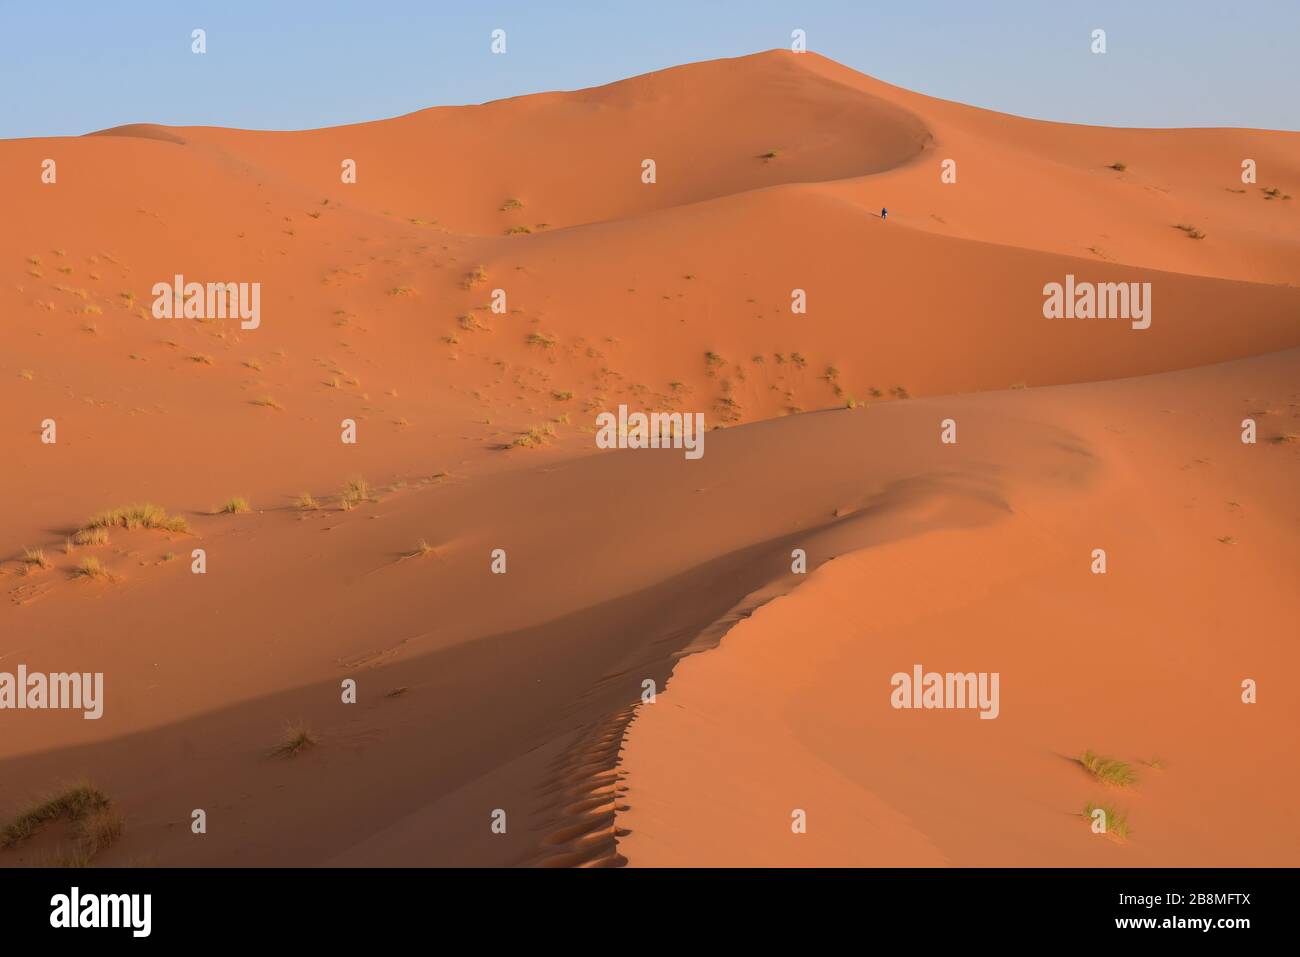 The golden sand dunes of Erg Chebbi glow in the early evening sun, Sahara Desert, Morocco, North Africa Stock Photo